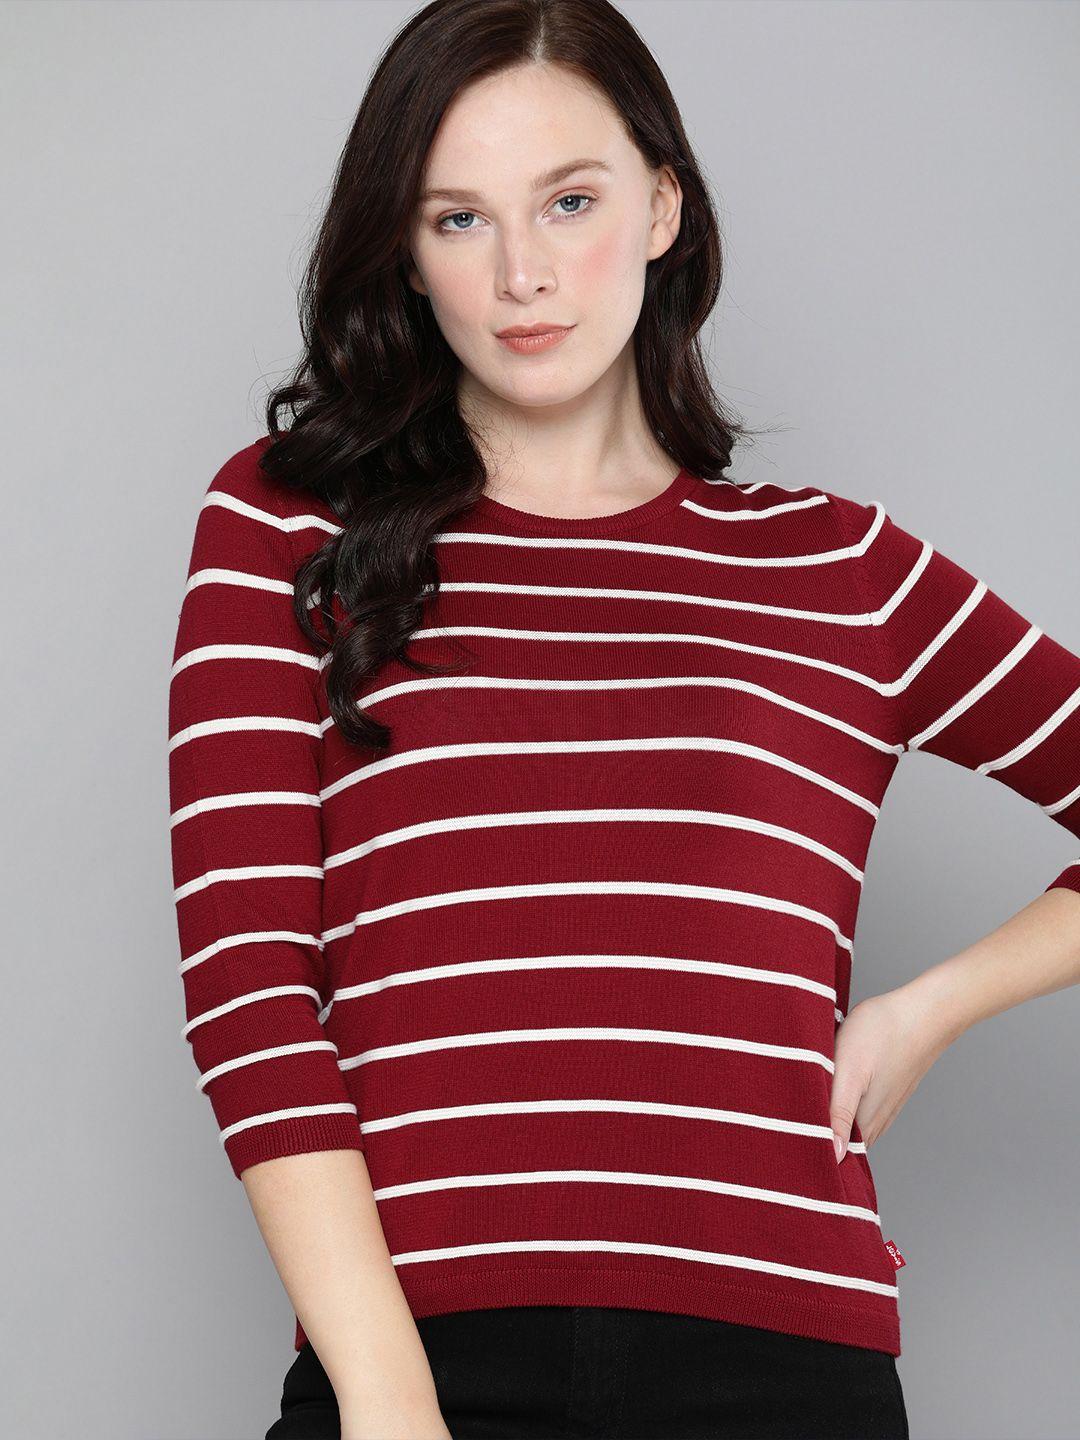 levis women maroon & white striped pullover sweater